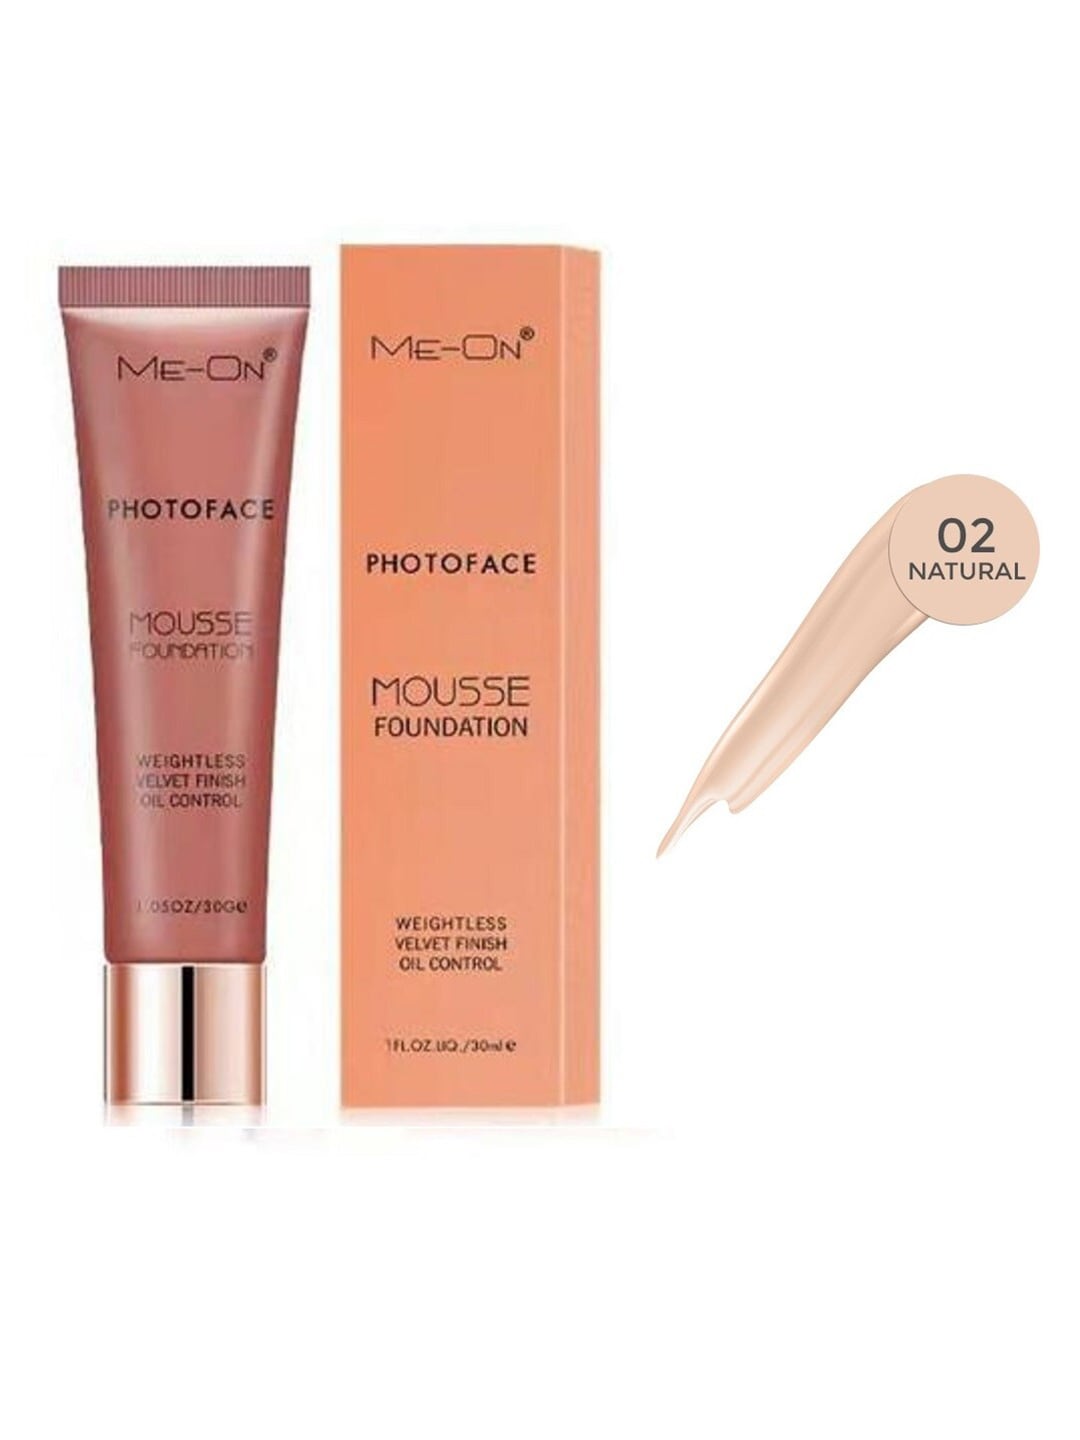 ME-ON Weightless Velvet Finish Oil Control Photoface Mousse Foundation 30 ml - Natural 02 Price in India